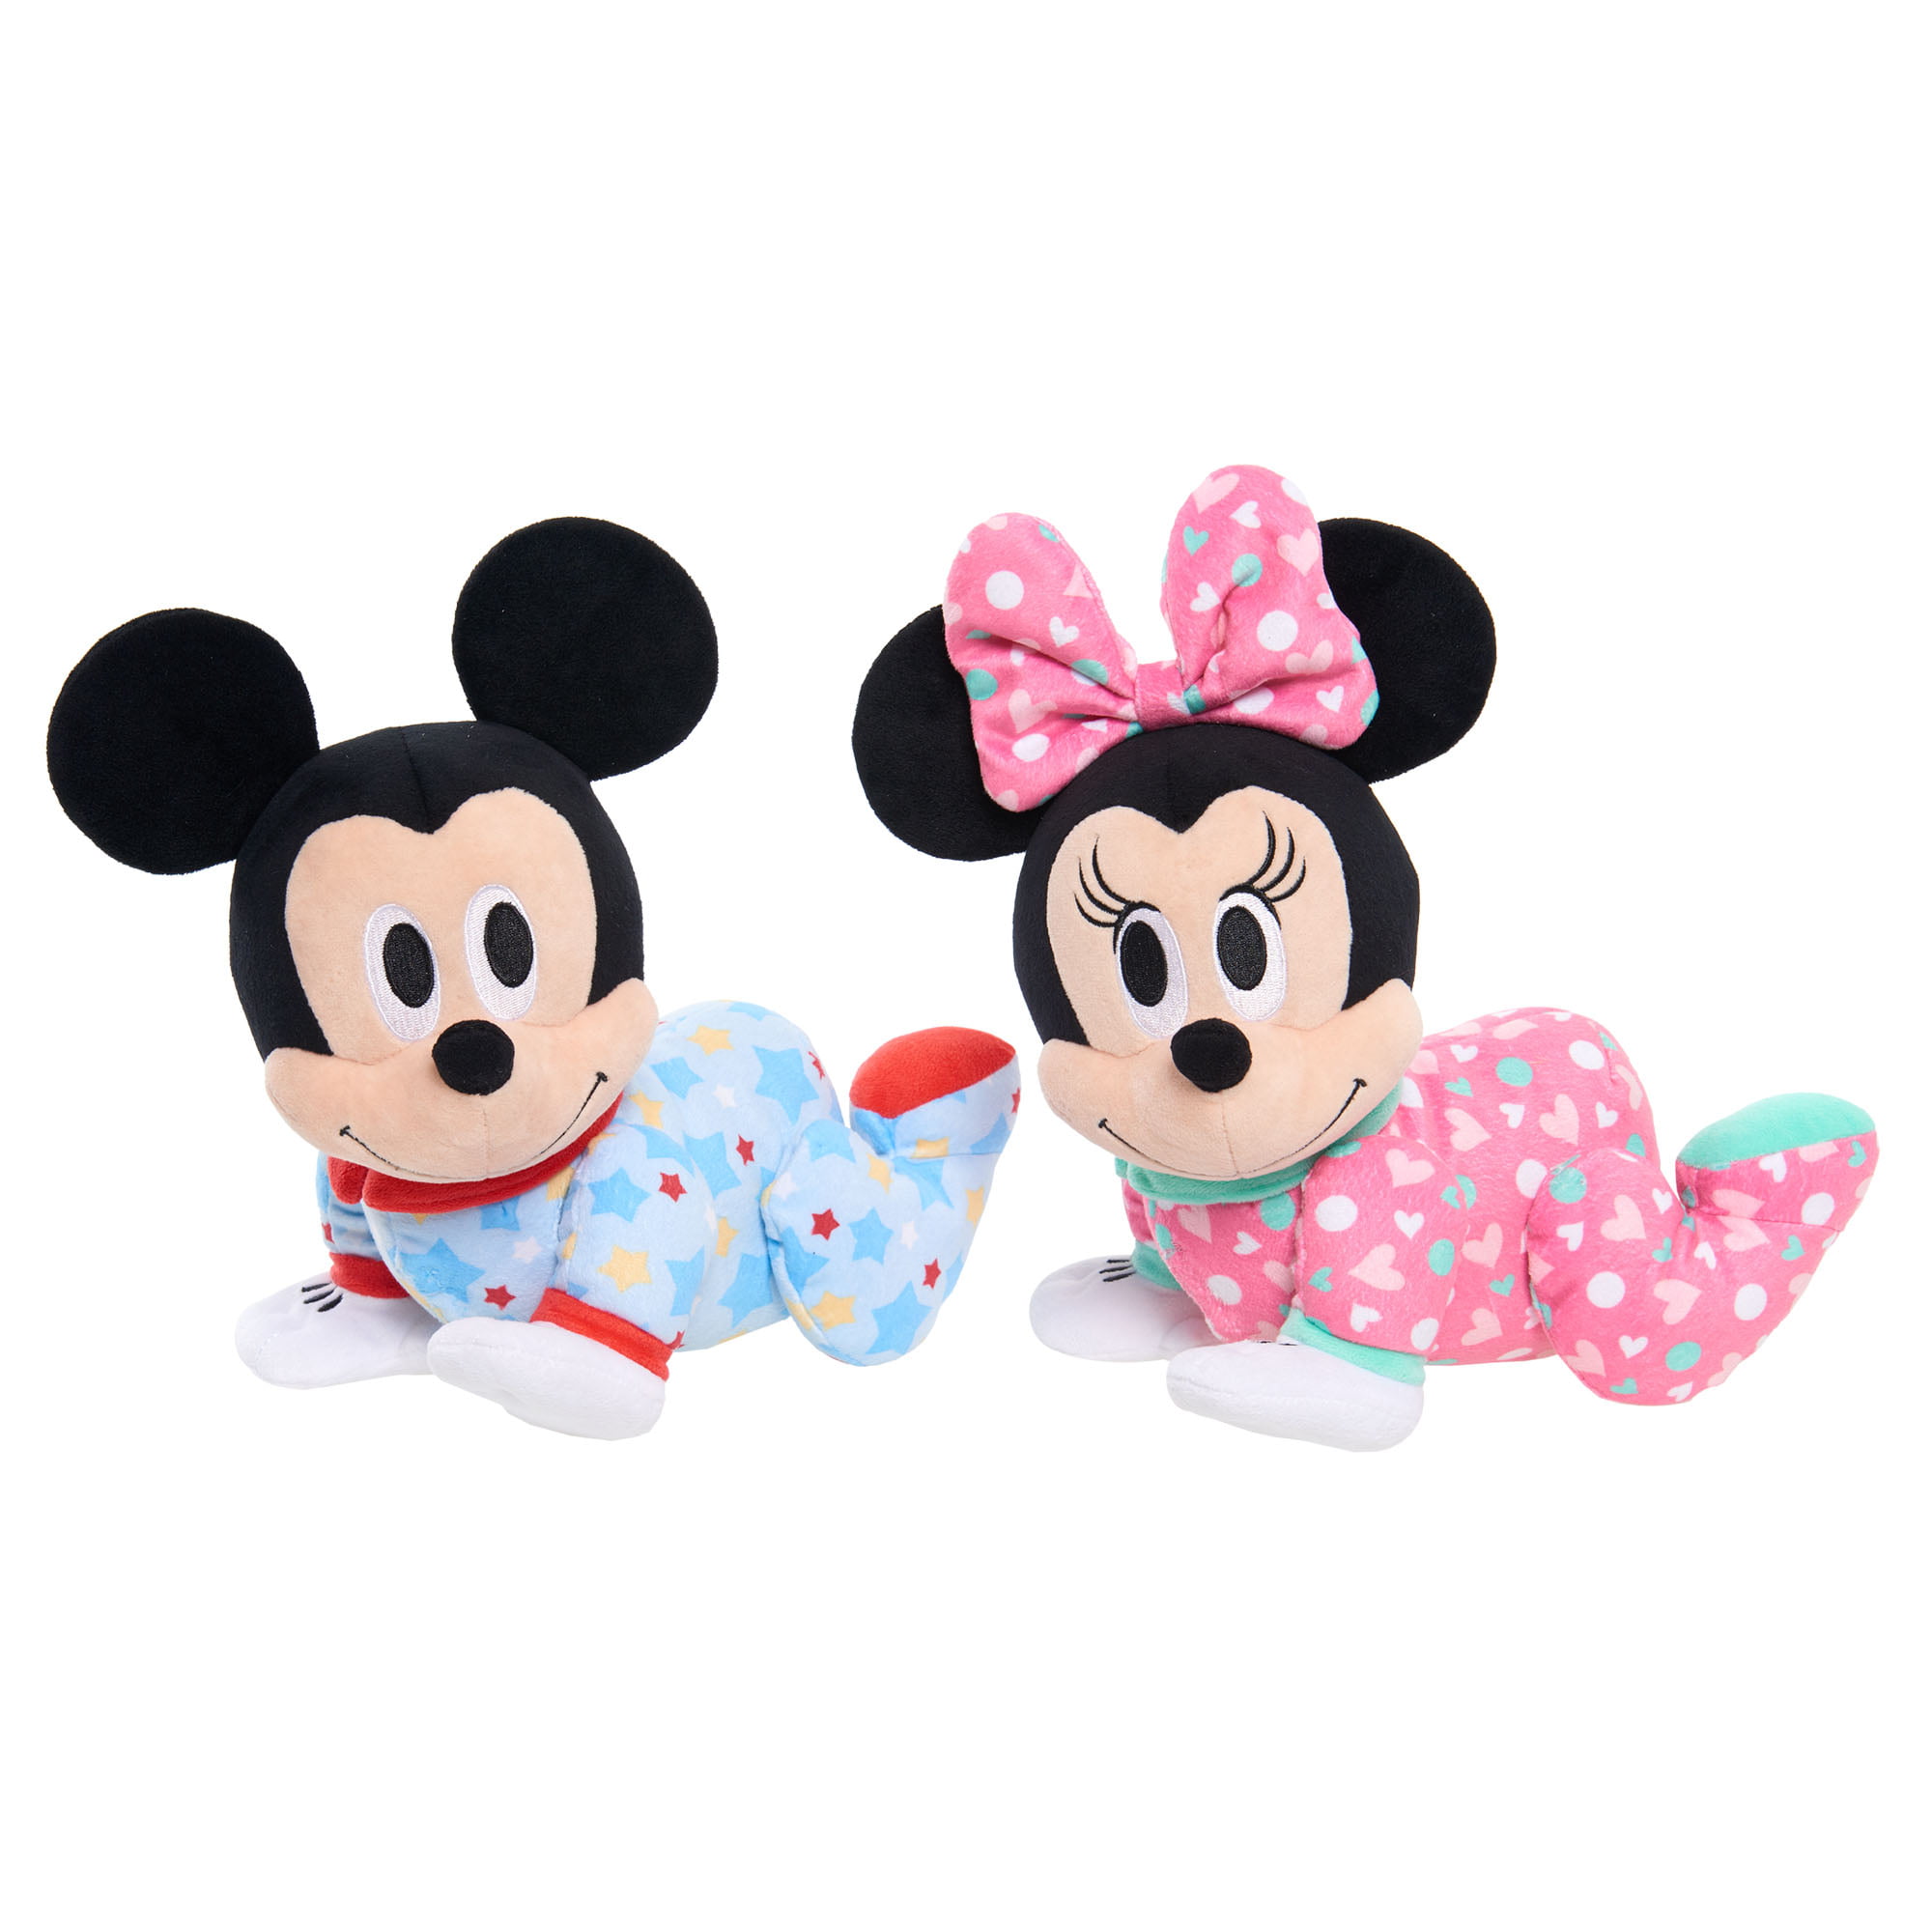 Details about   Disney Baby Girl Just Too Adorable Minnie Mouse Dress Size 12 Month